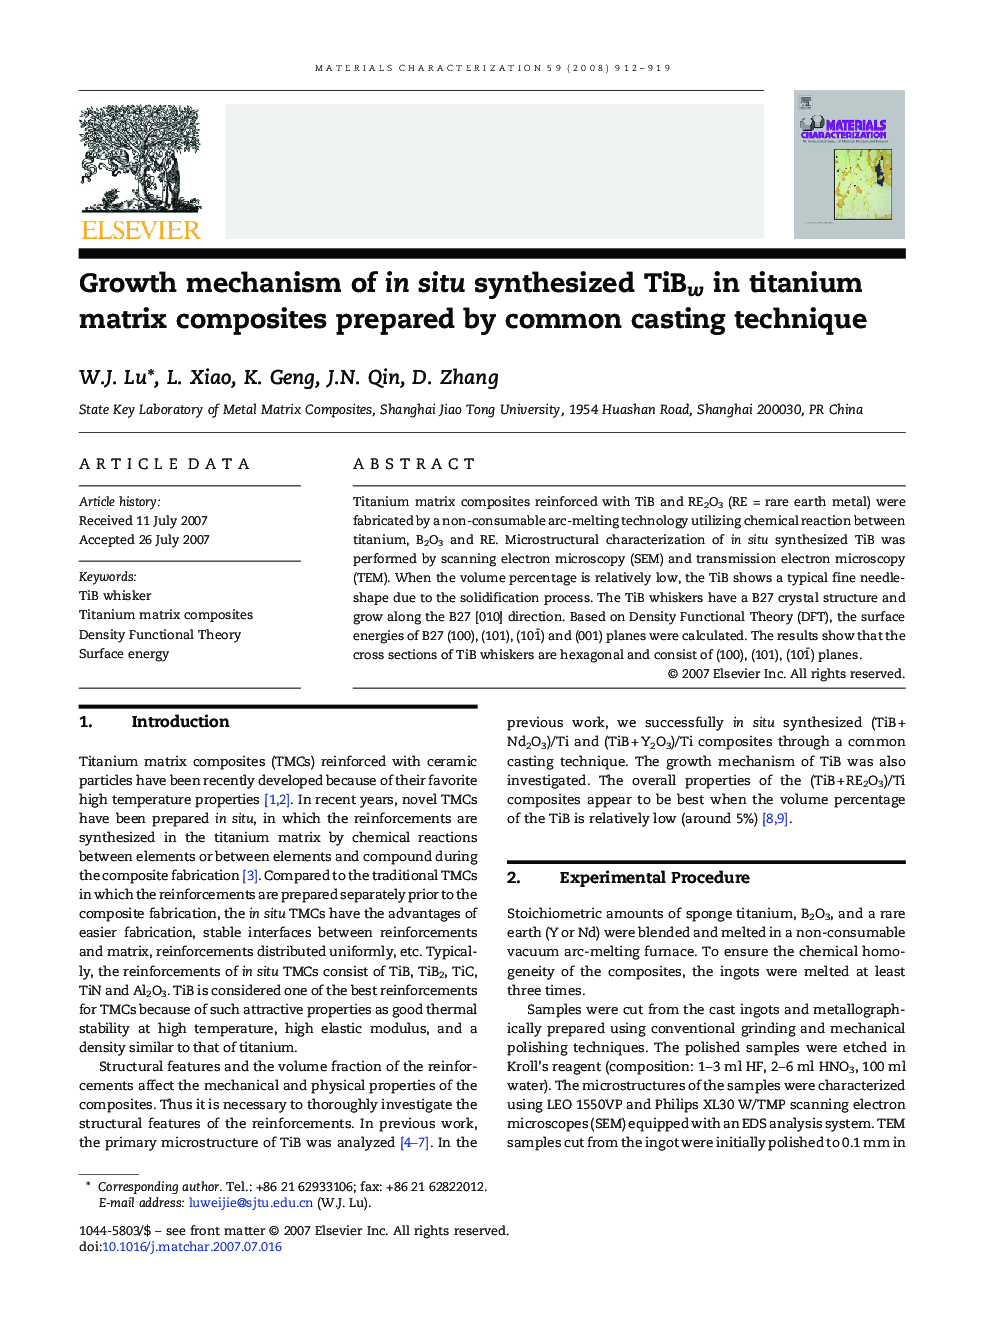 Growth mechanism of in situ synthesized TiBw in titanium matrix composites prepared by common casting technique